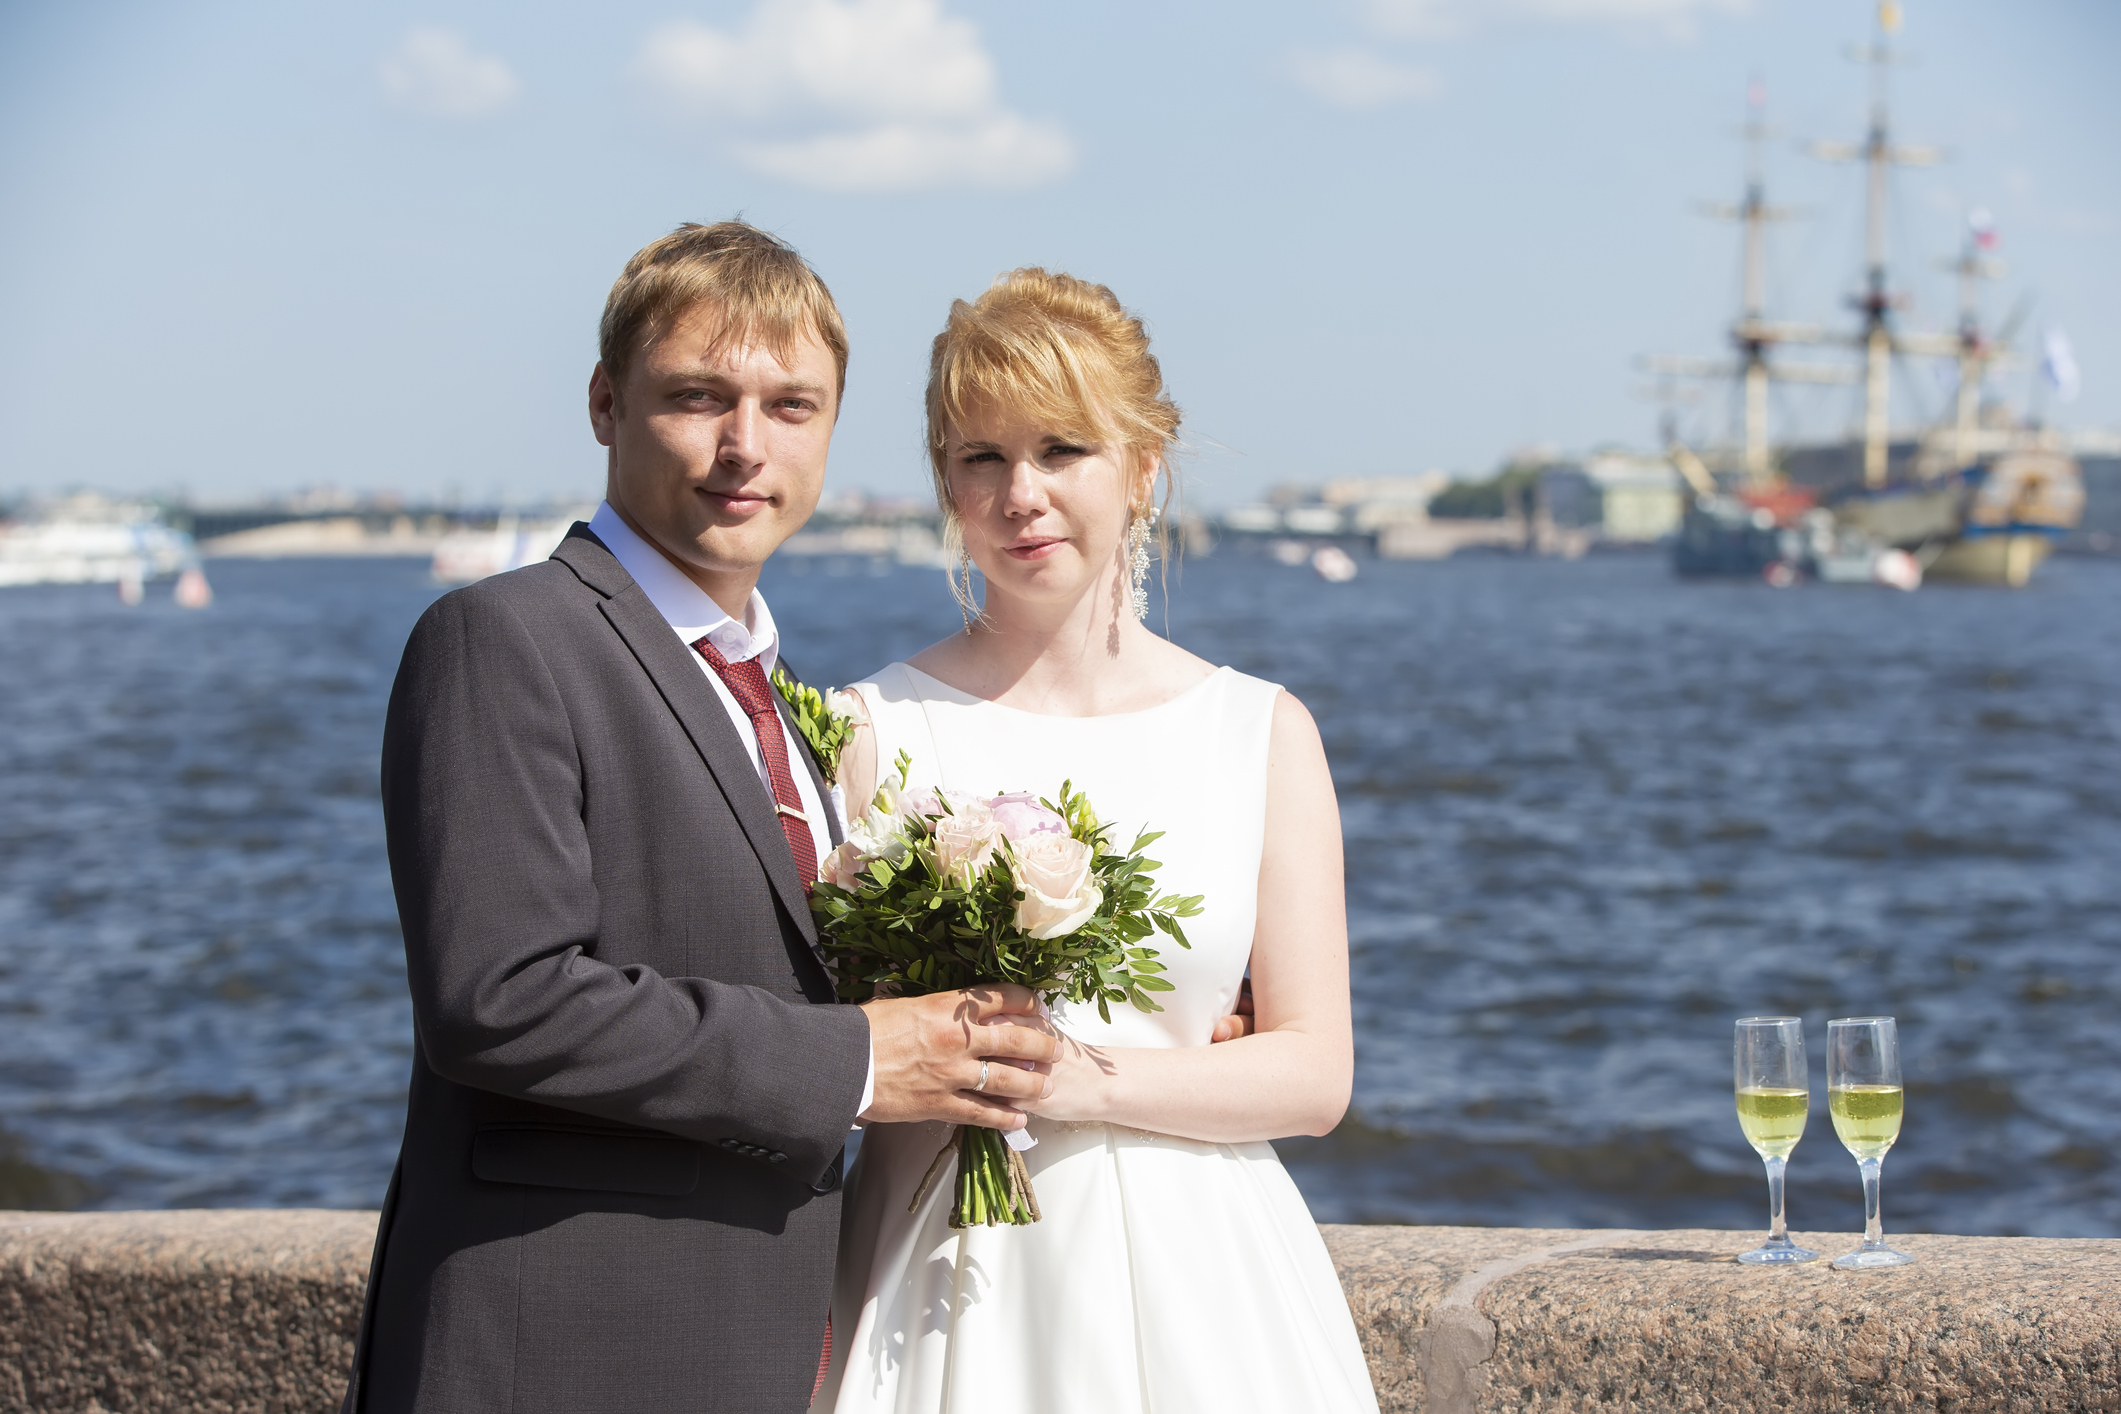 Bride and groom holding hands by the river with a ship in the background, bride holding a bouquet, and two glasses on the ledge